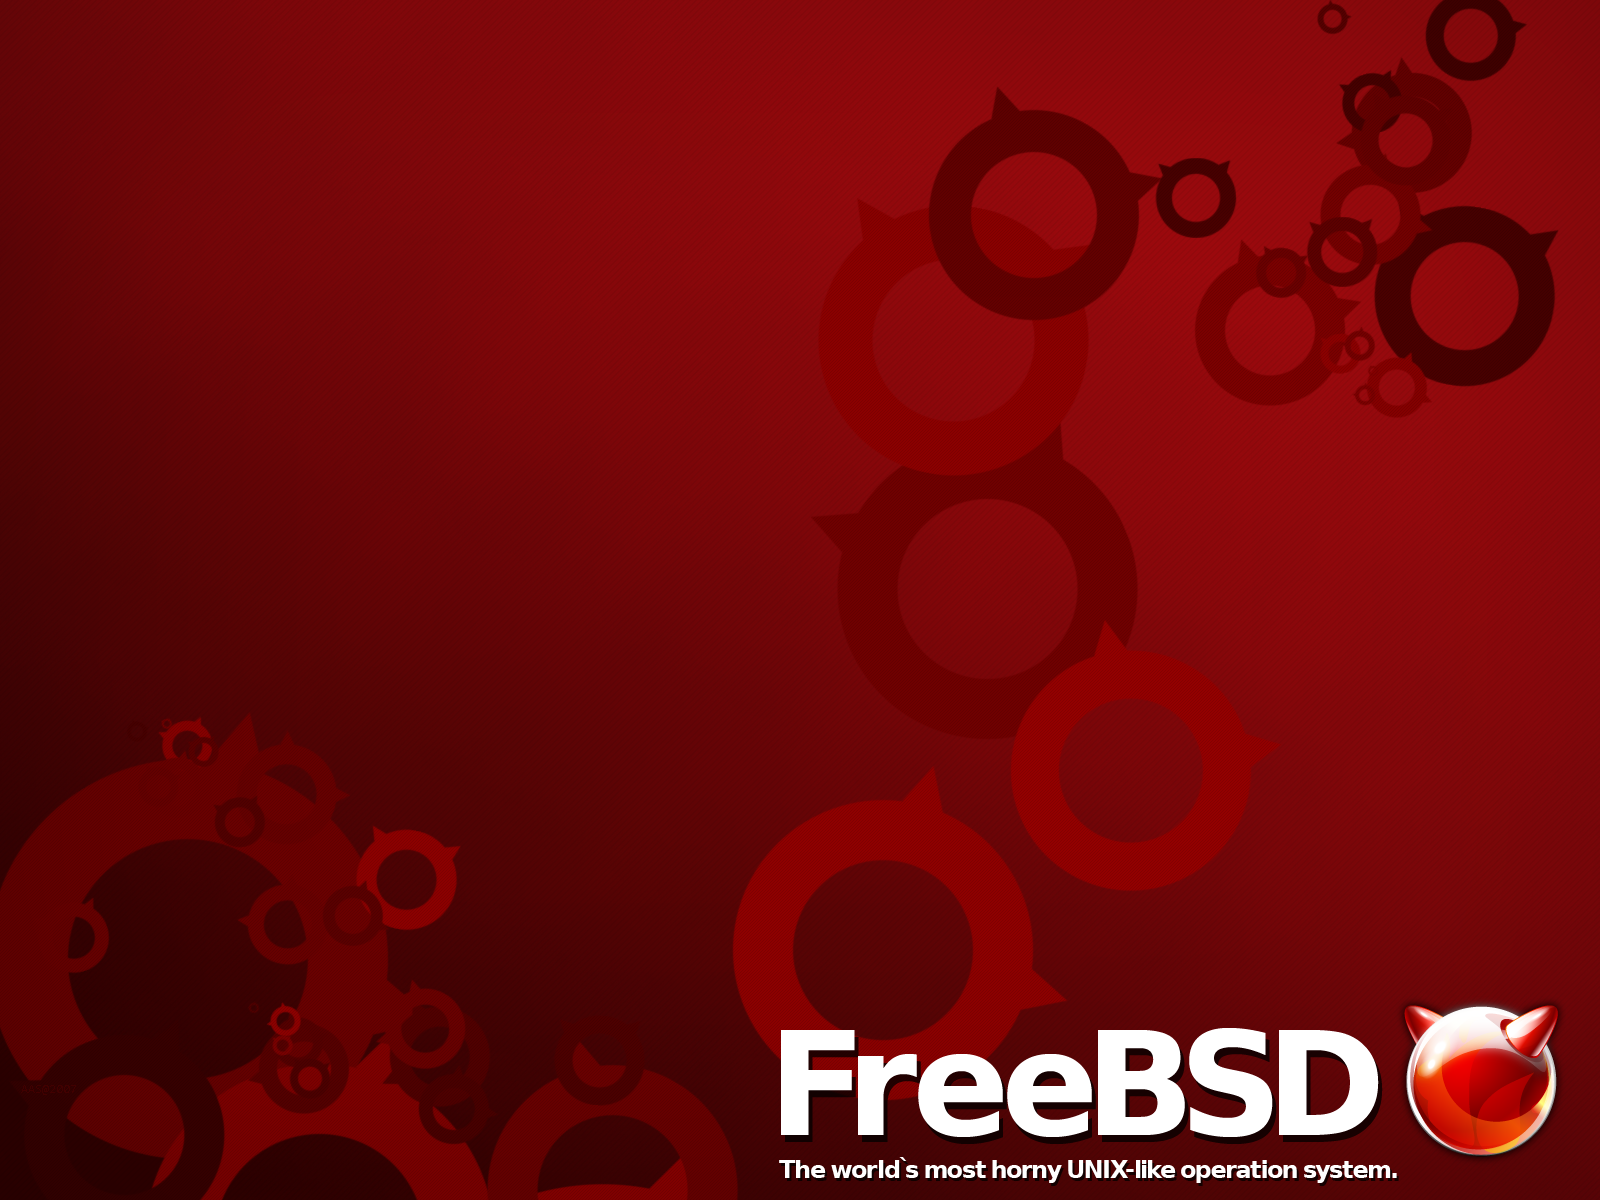 Media asset in full size related to 3dfxzone.it news item entitled as follows: Il FreeBSD Release Engineering Team rilascia la distribuzione Unix FreeBSD 10.4 | Image Name: news27174_FreeBSD_1.png